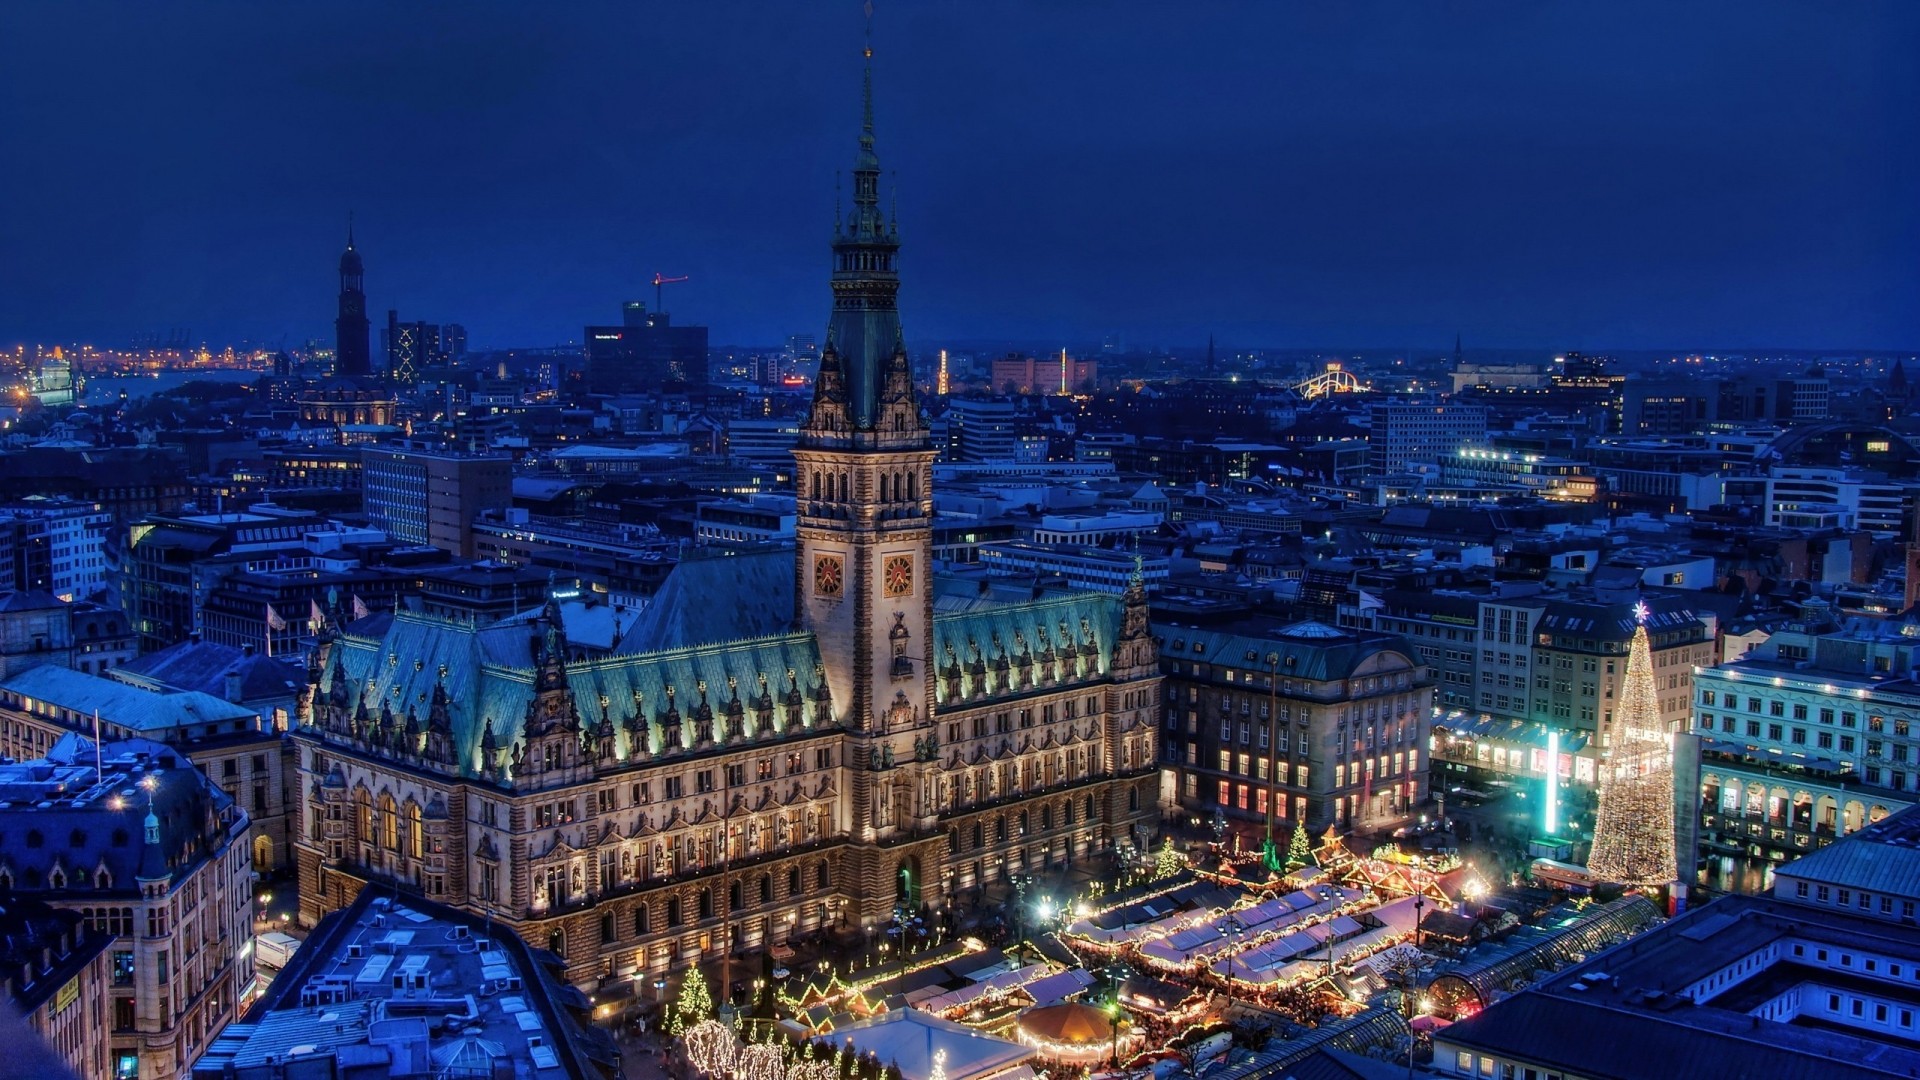 General 1920x1080 cityscape architecture tower old building Germany Hamburg town square rooftops markets Christmas tree evening church winter lights street aerial view city lights blue